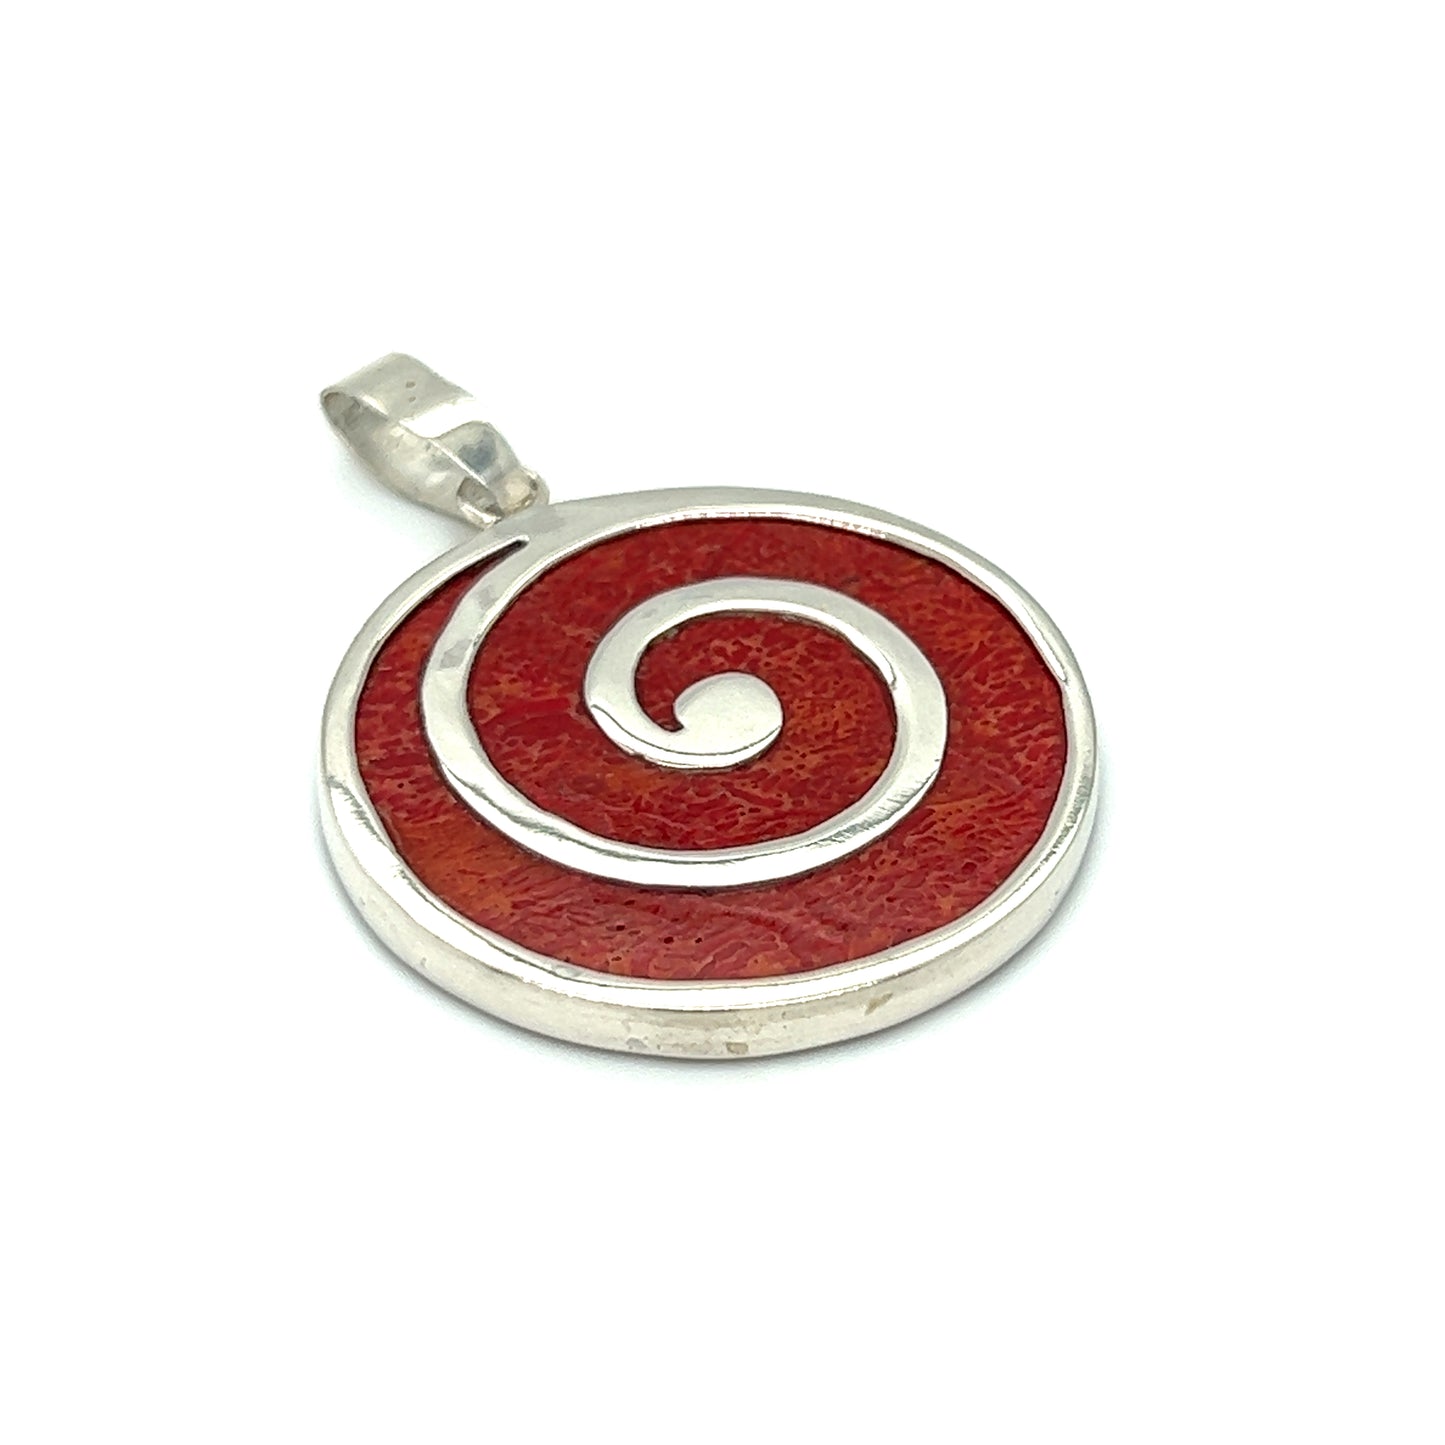 A Coral Spiral Pendant on a white background. This stunning pendant features a spiral design in vibrant red hue, crafted with .925 Sterling Silver for an exquisite touch.